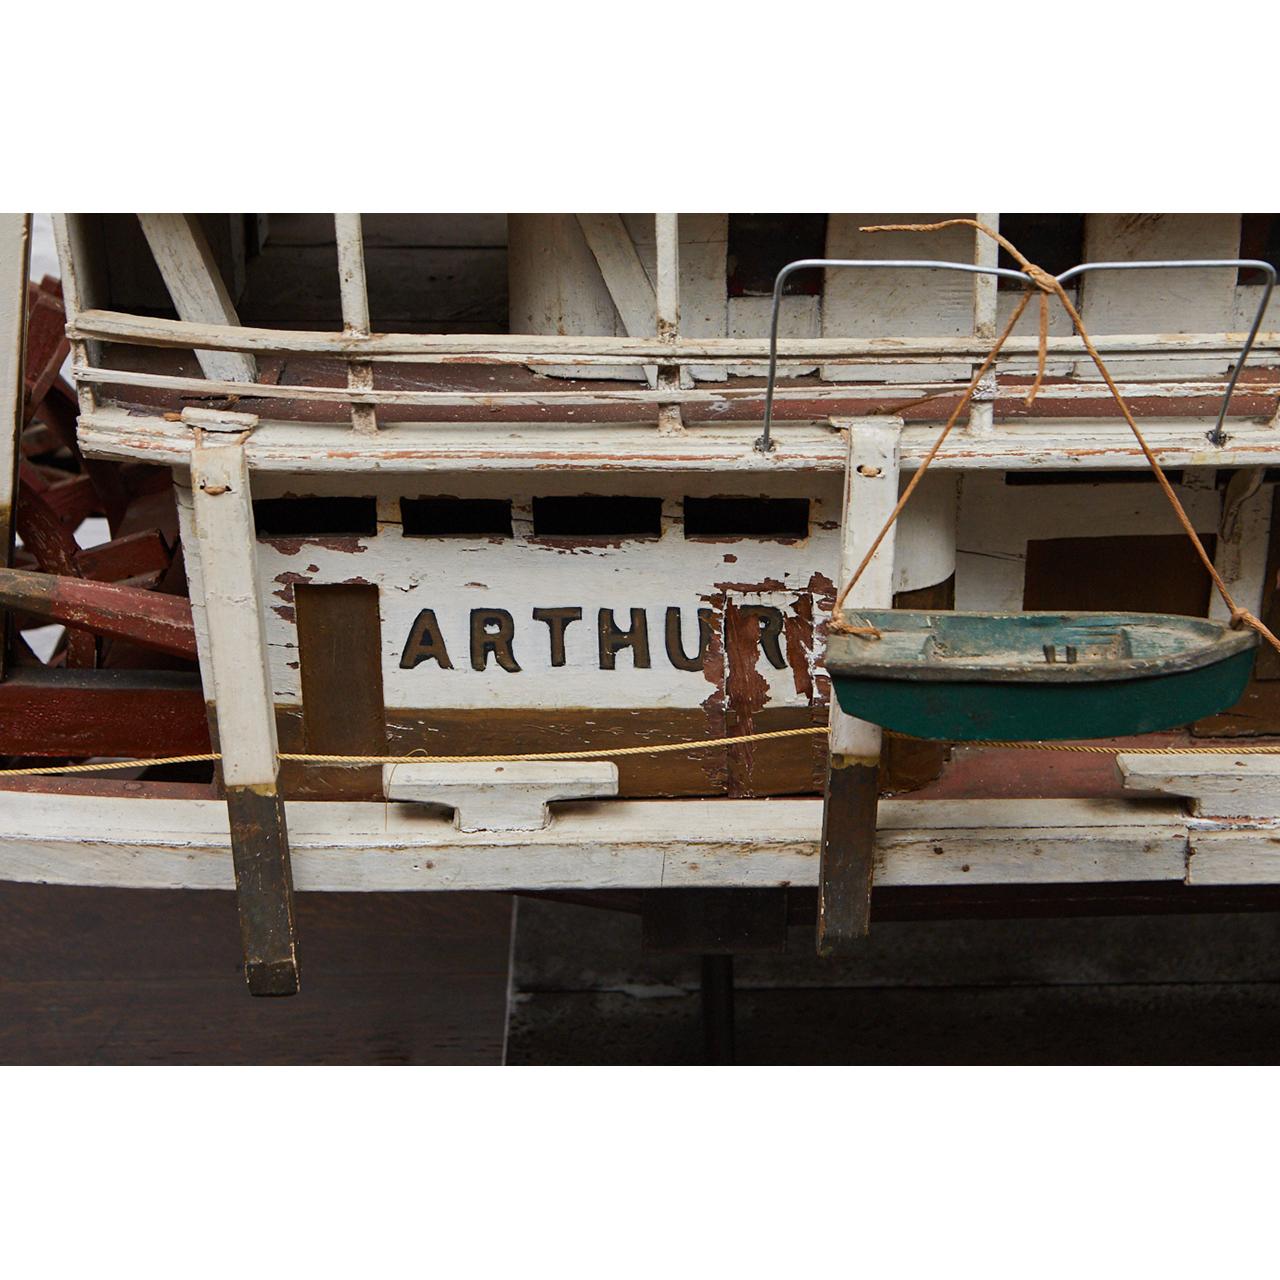 This Folk Art paddleboat from the 1920s has incredible articulated details throughout. The boat is named “Arthur” and hails from Paducah, KY. The paddle turns, the top deck has fabric sacks of grain and bails of cotton, the buoys are moveable, and